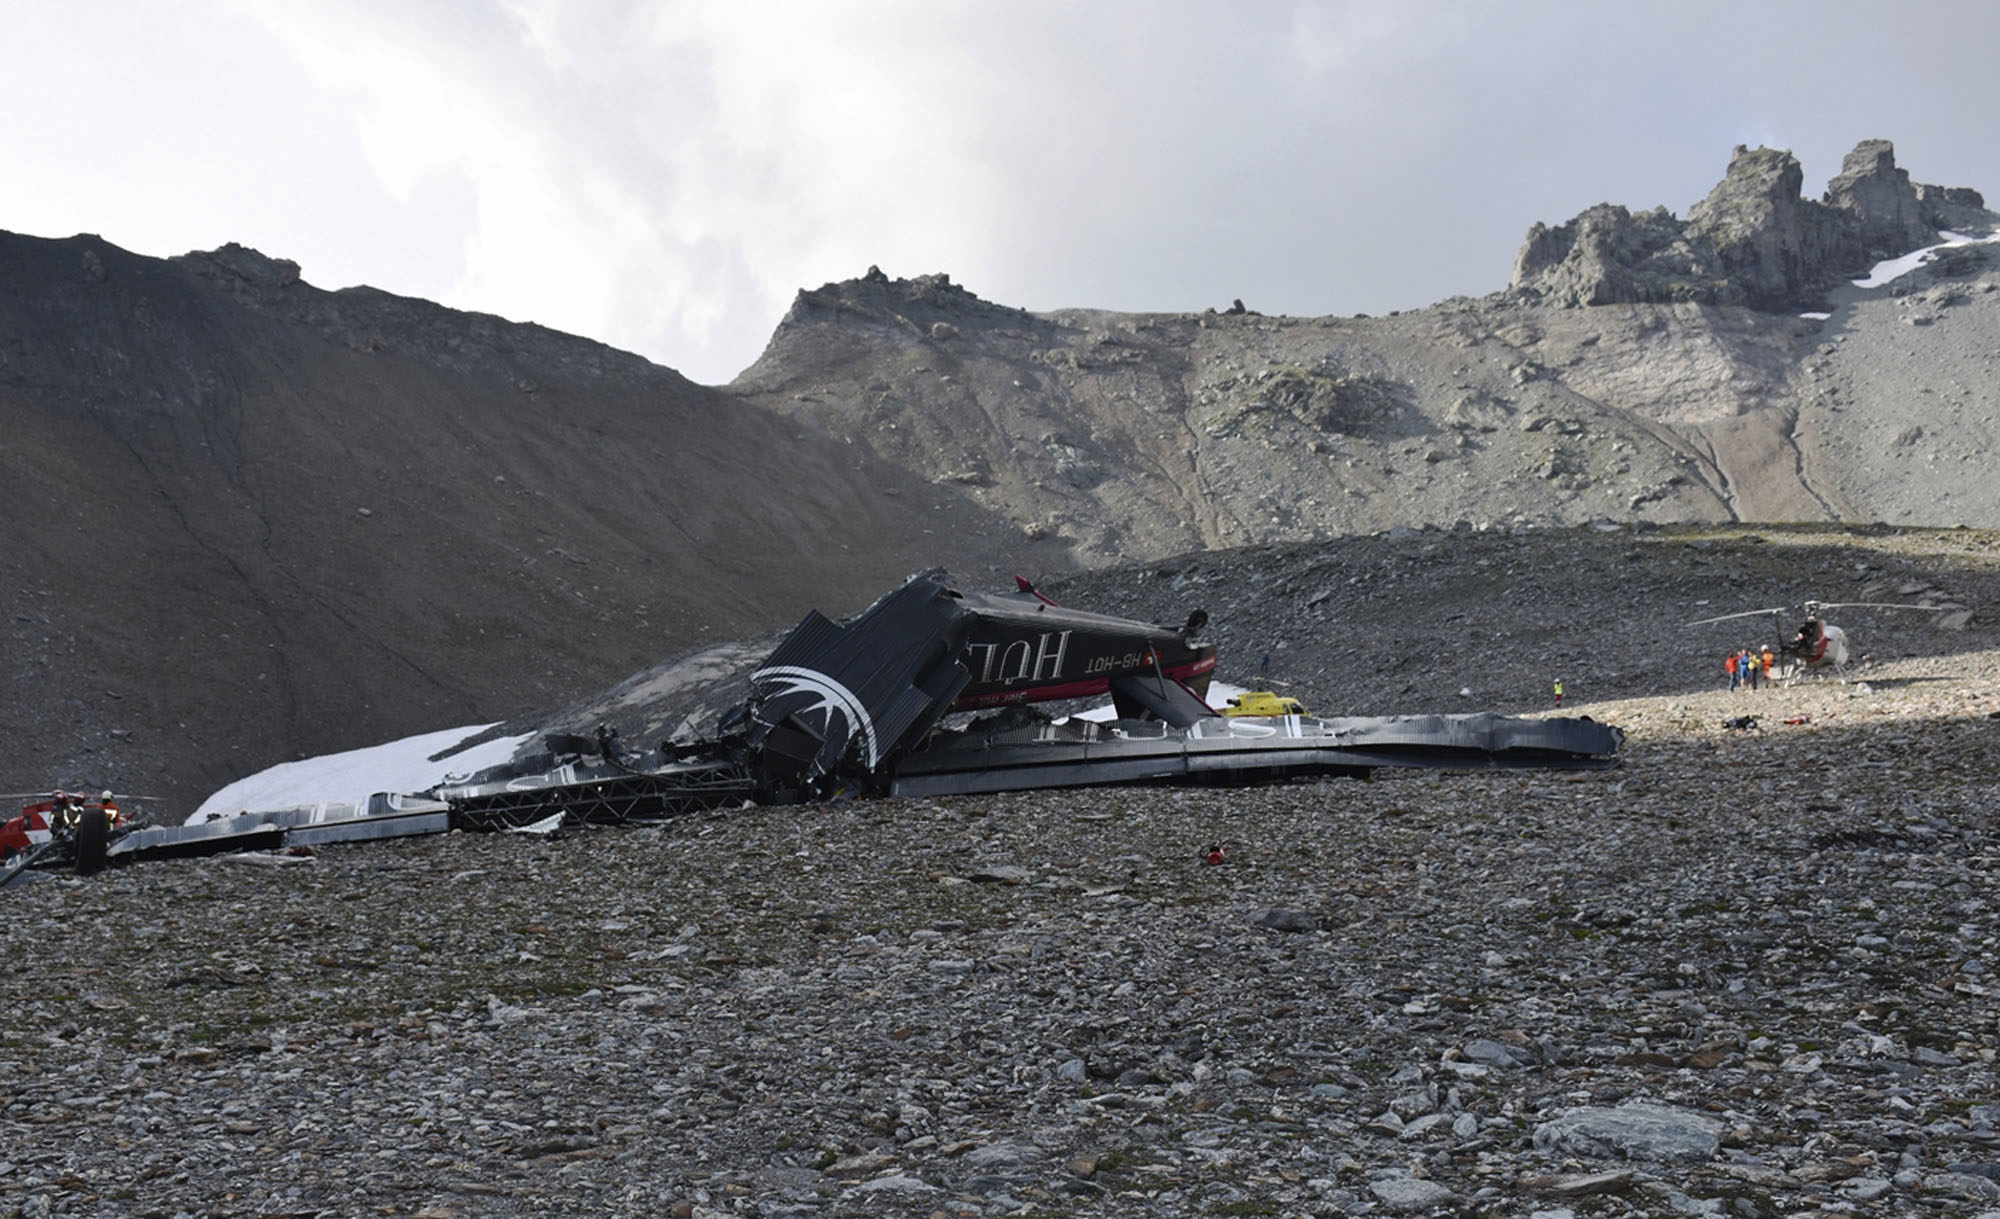 The wreckage of the old-time propeller plane Ju 52 after it went down went down, Aug. 4, 2018, on the Piz Segnas mountain above the Swiss Alpine resort of Flims, striking the mountain's western flank about 8,330 feet above sea level, in Switzerland.